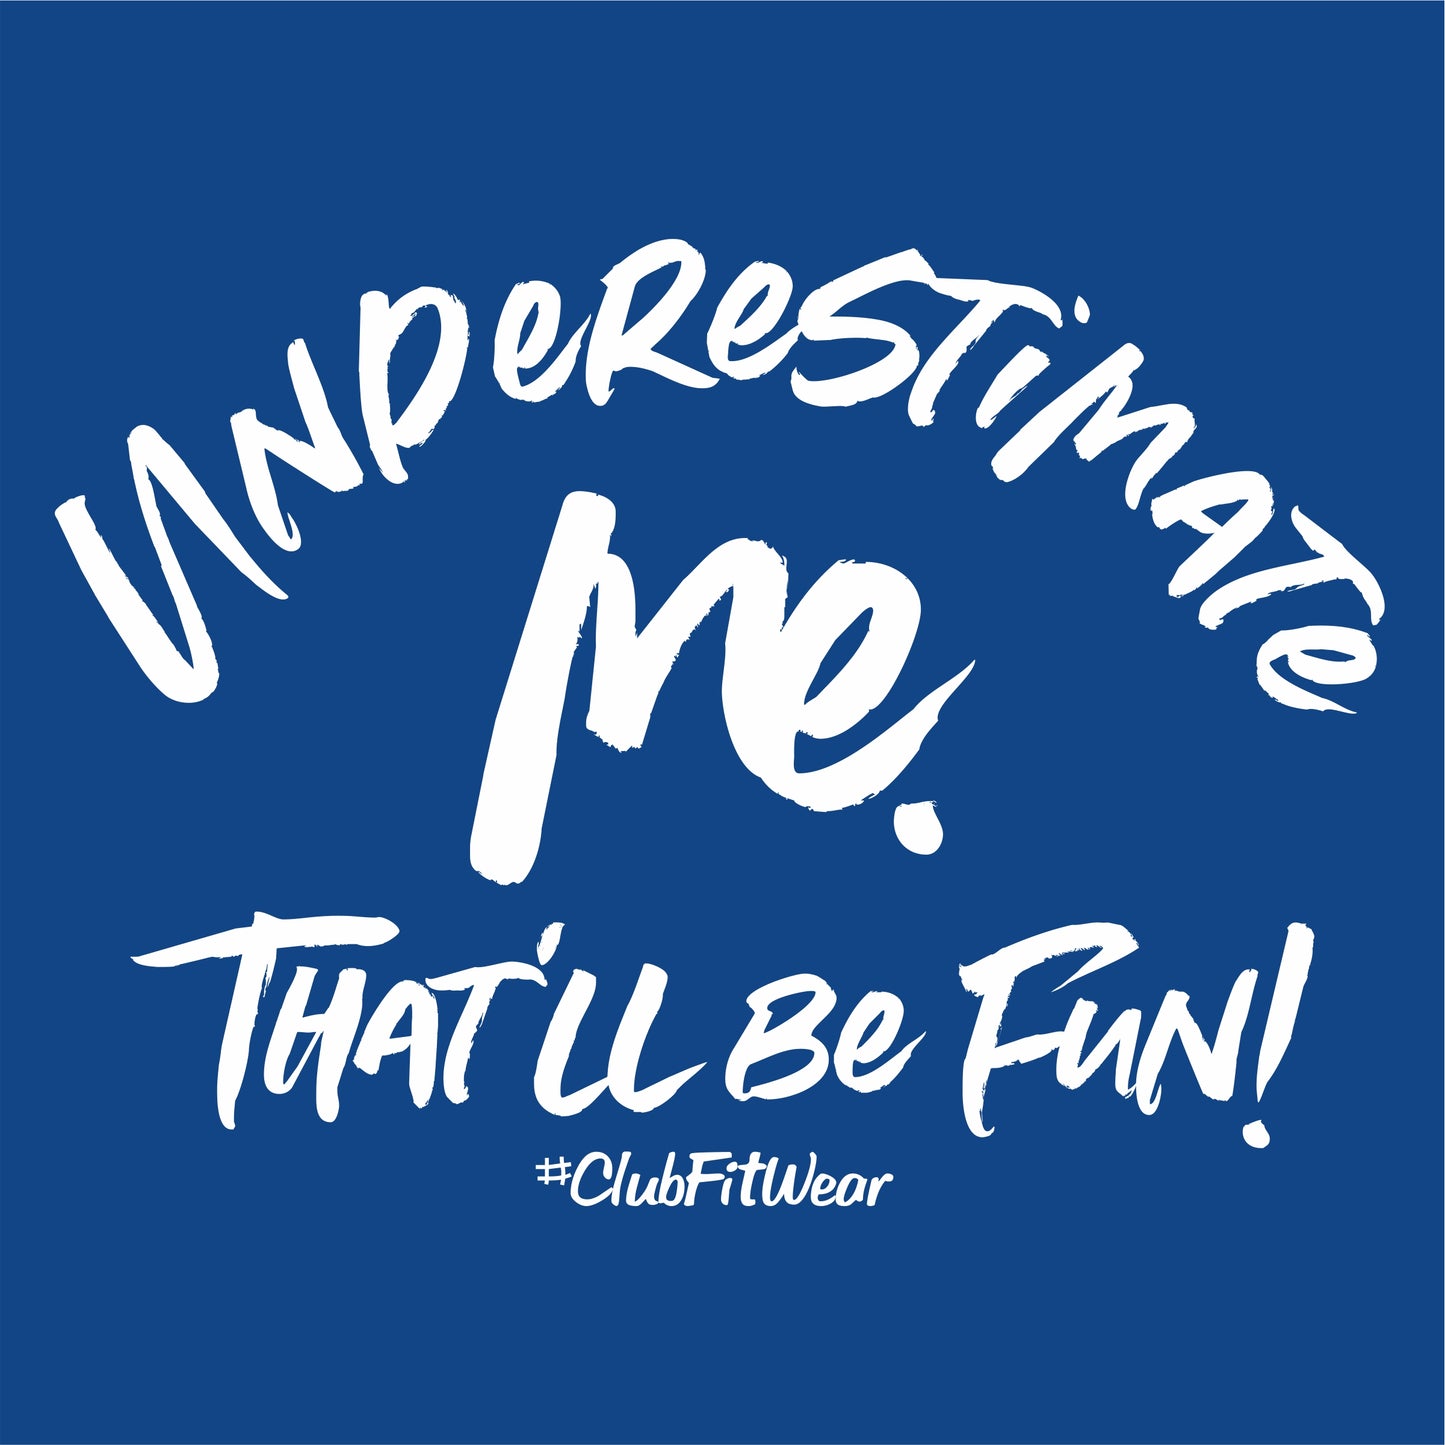 Underestimate me. That'll be Fun!